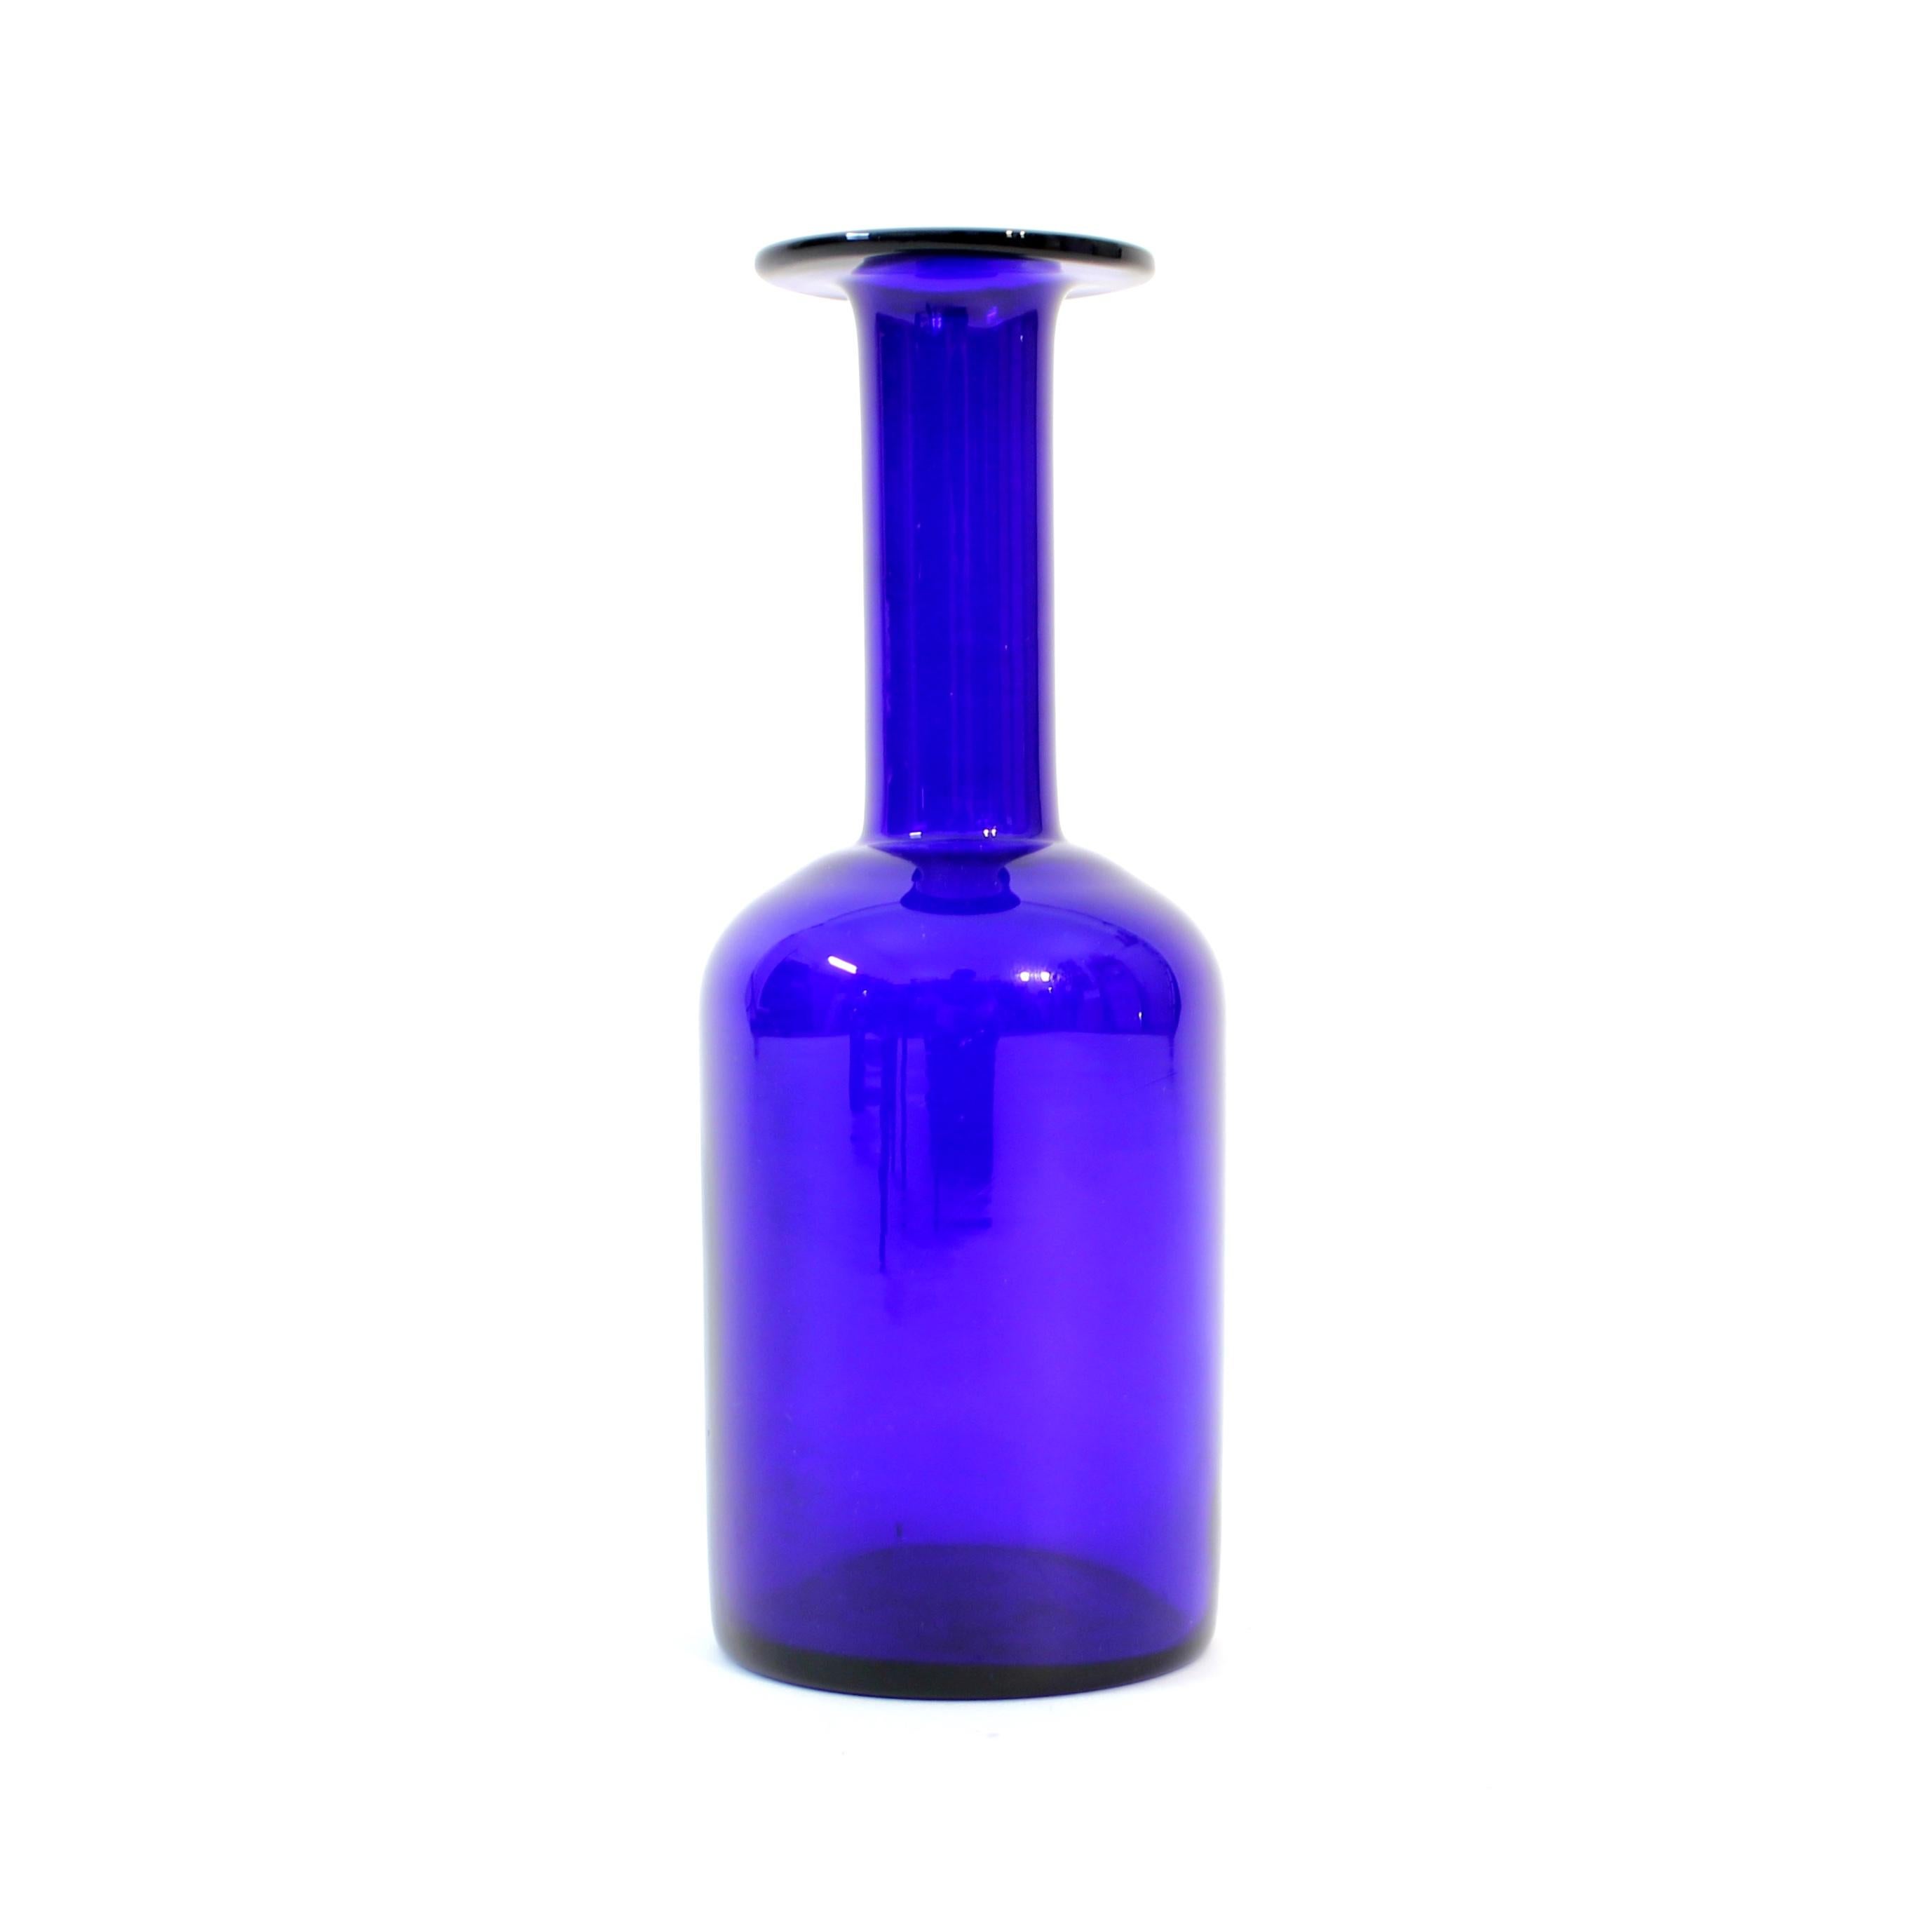 Bottle (or vase) in cobalt blue, designed by Otto Brauer for legendary Danish glass company Holmegaard in the 1960s. This model is one of the most recognizble danish glass objects of the whole 20th century and were produced in a numbre of different